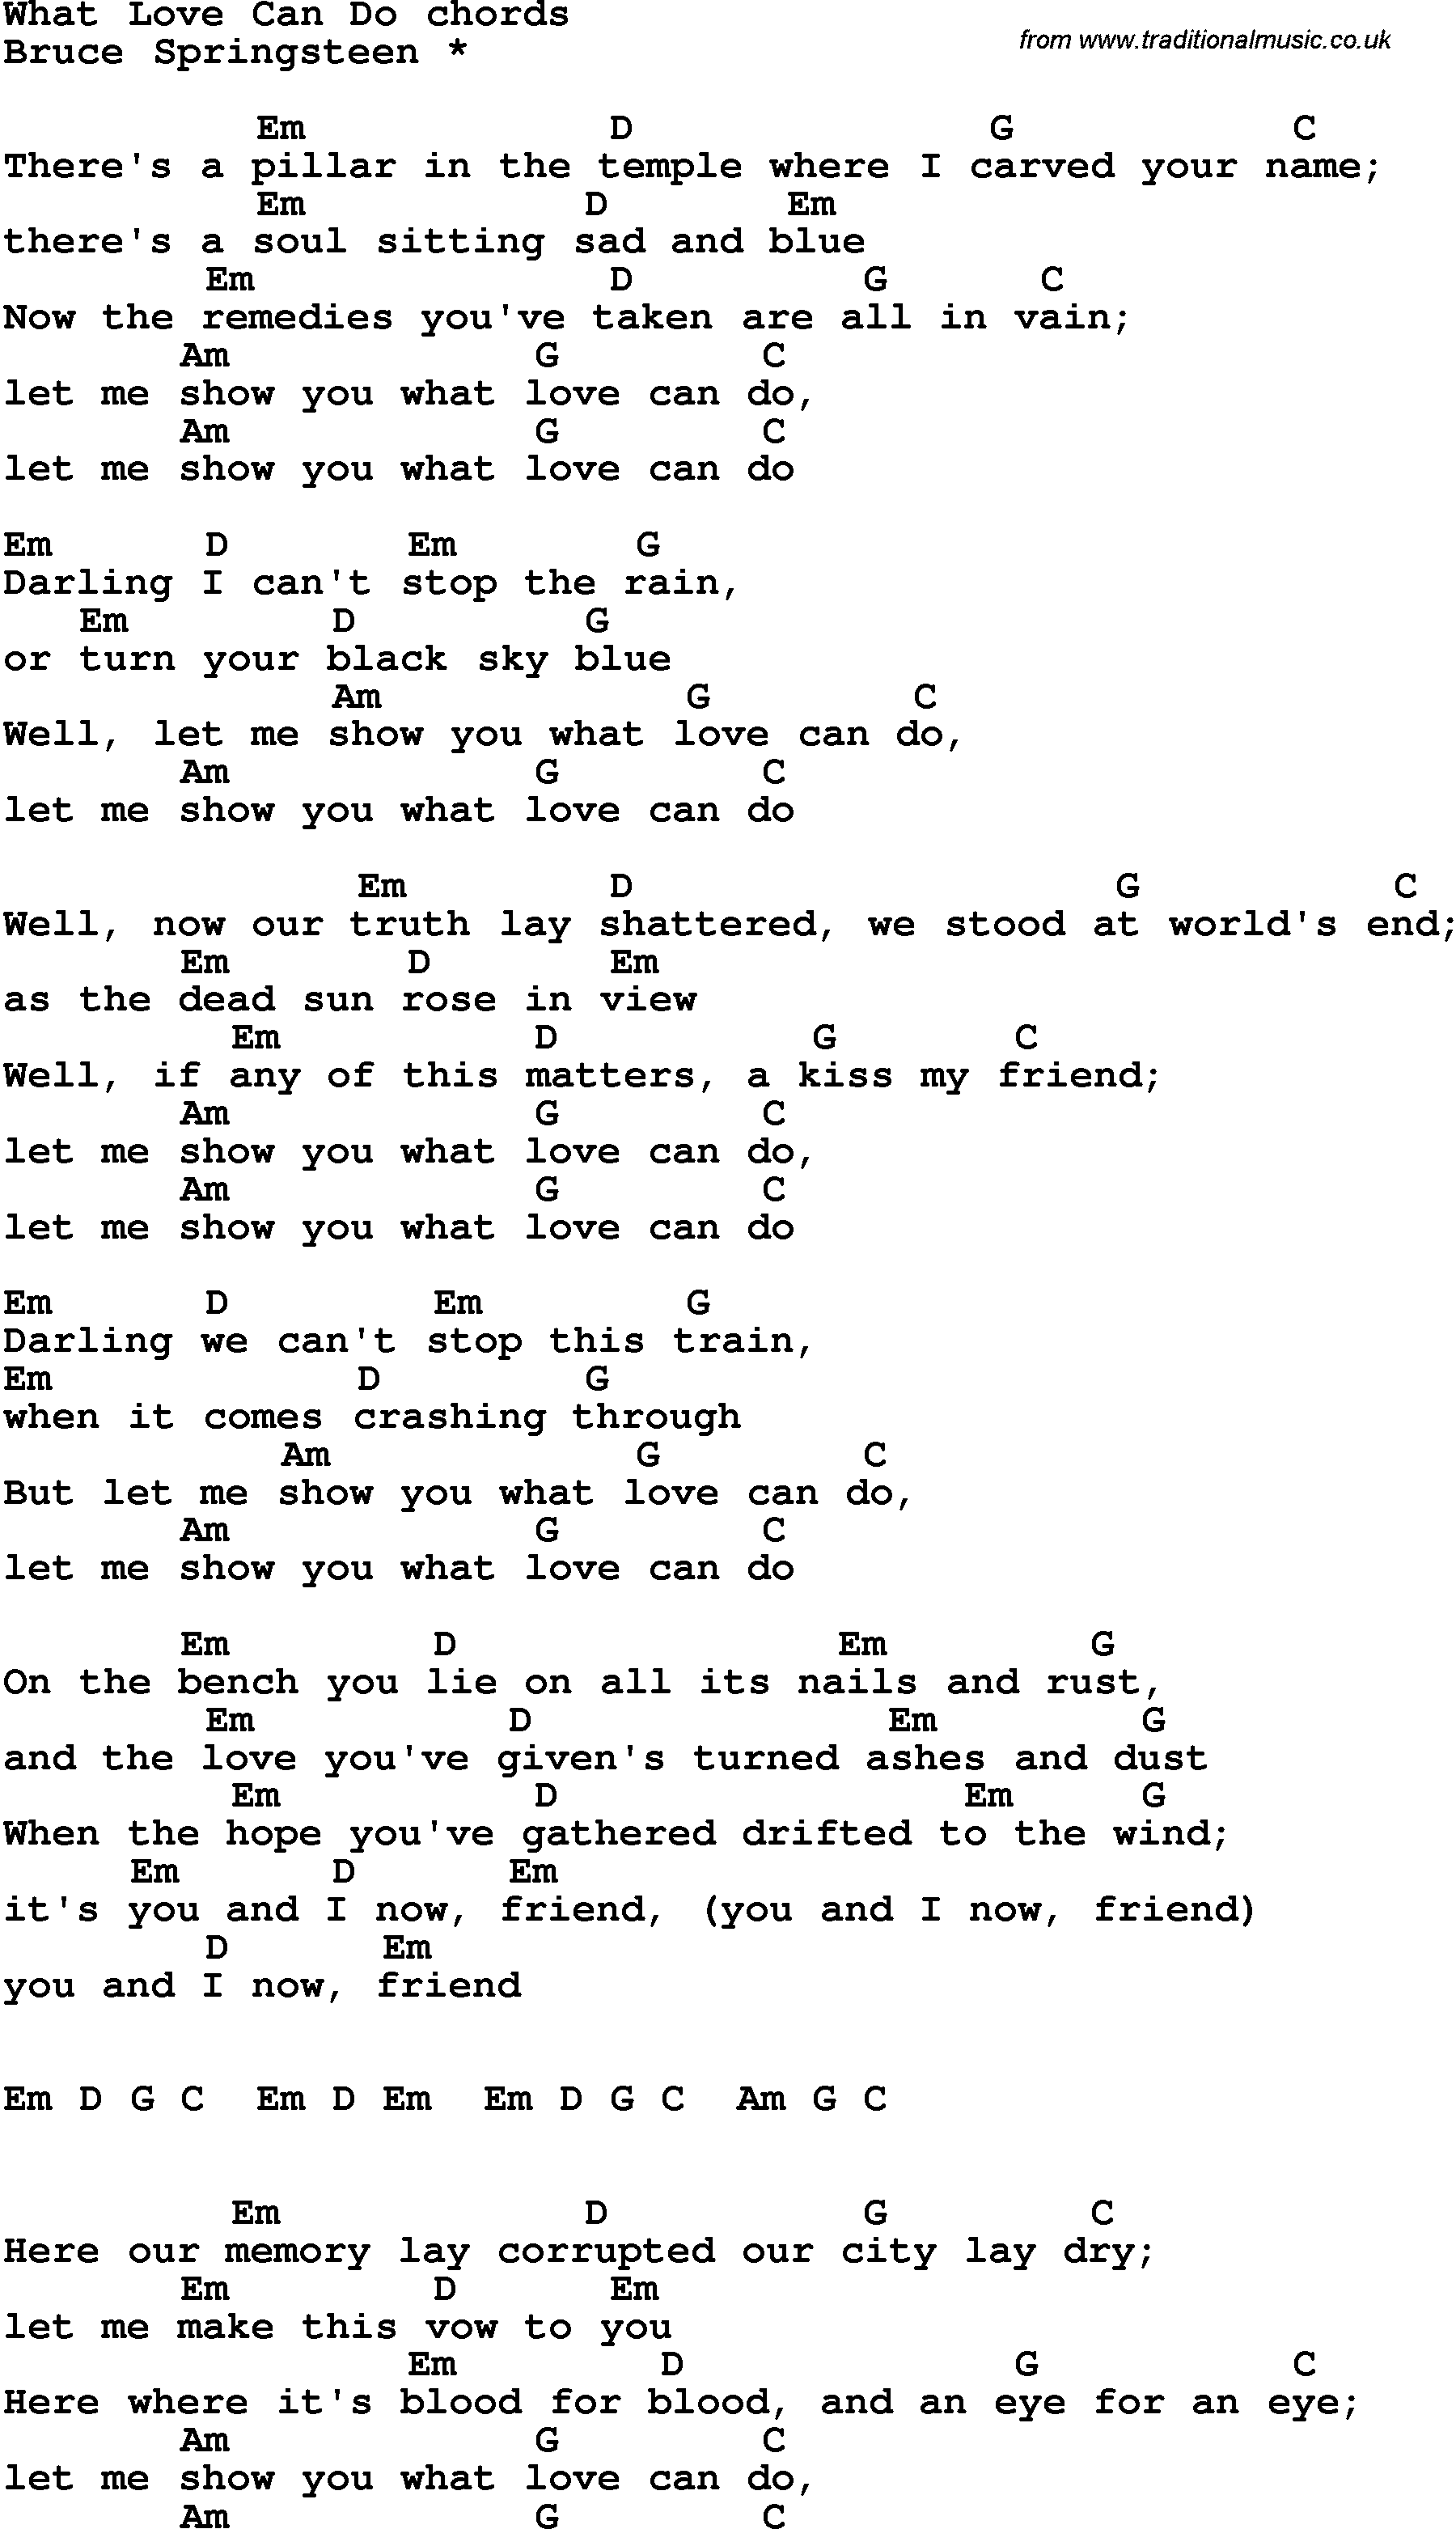 Song Lyrics with guitar chords for What Love Can Do